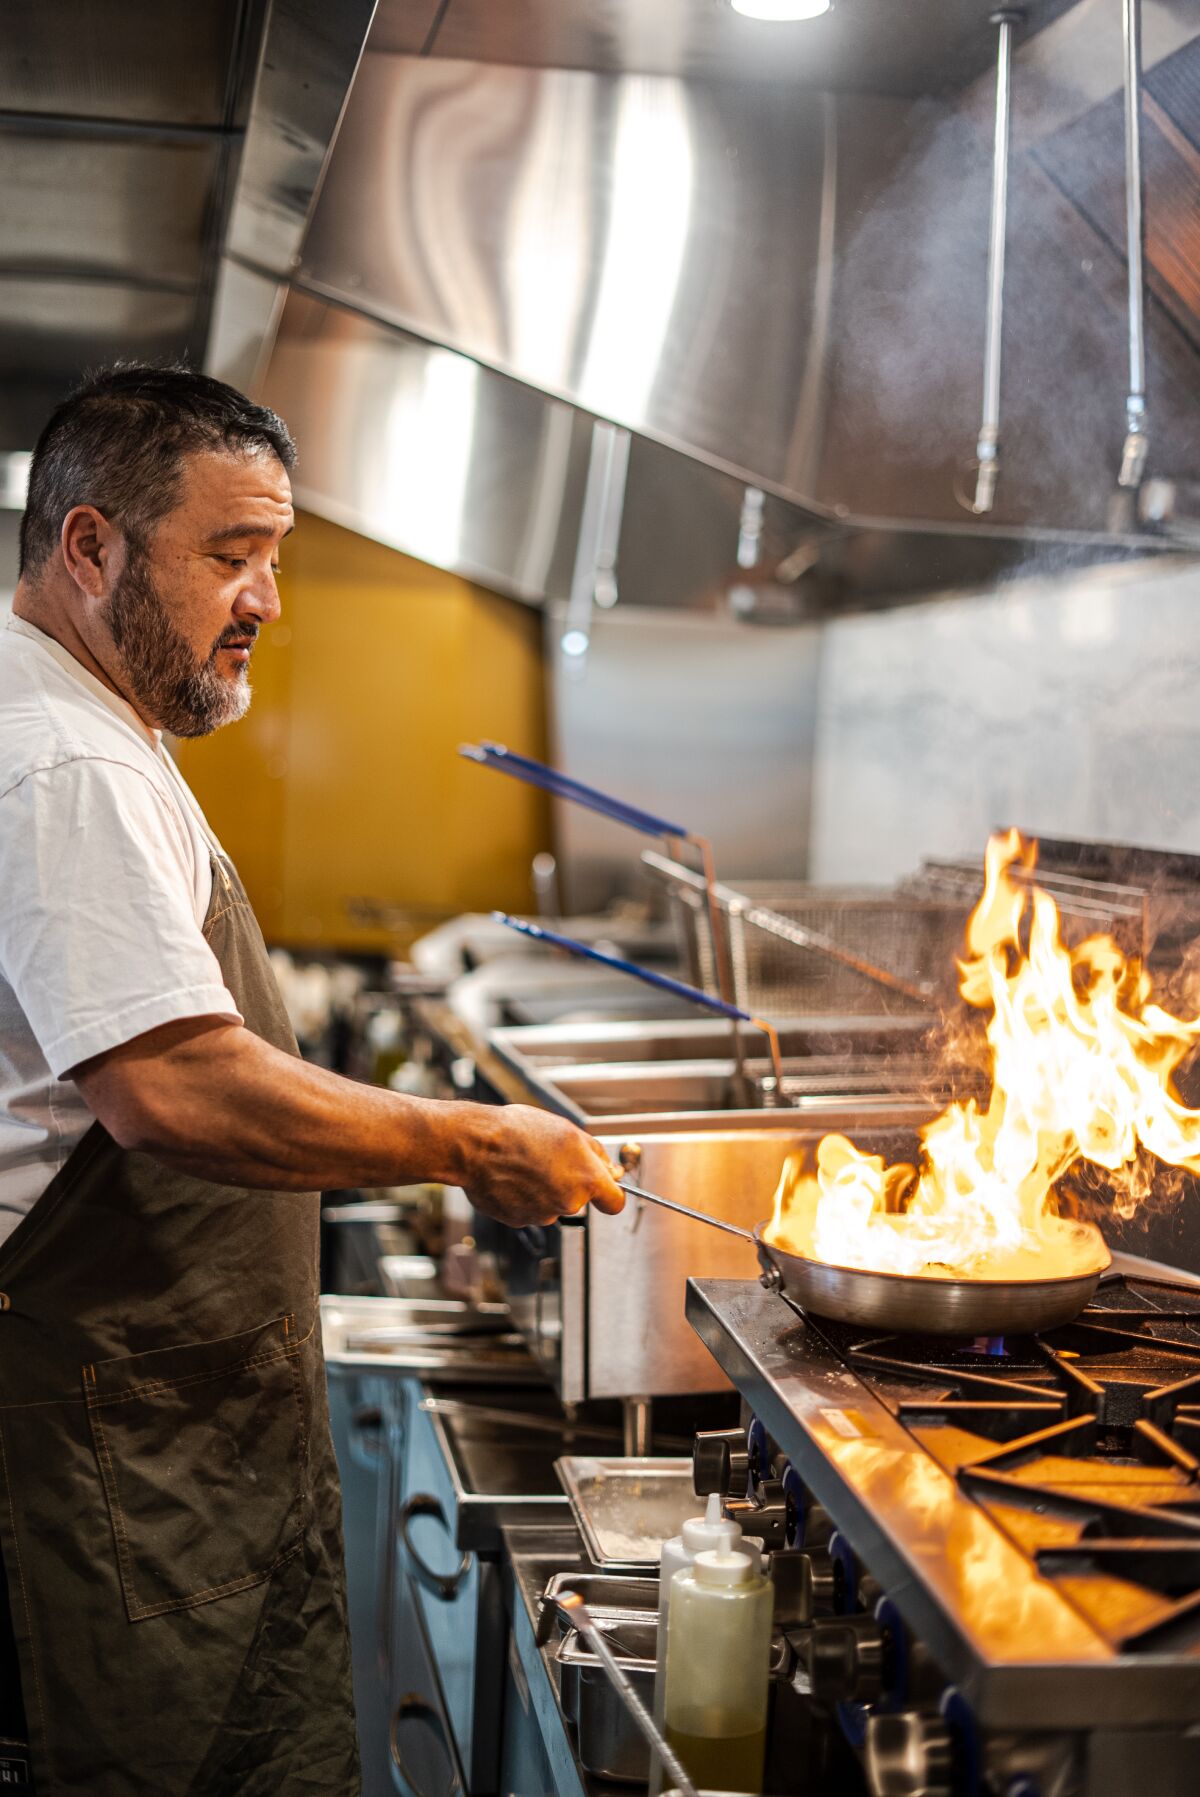 Executive chef and partner Ramiro Guerra in the kitchen at The Lab Collaborative in Oceanside.